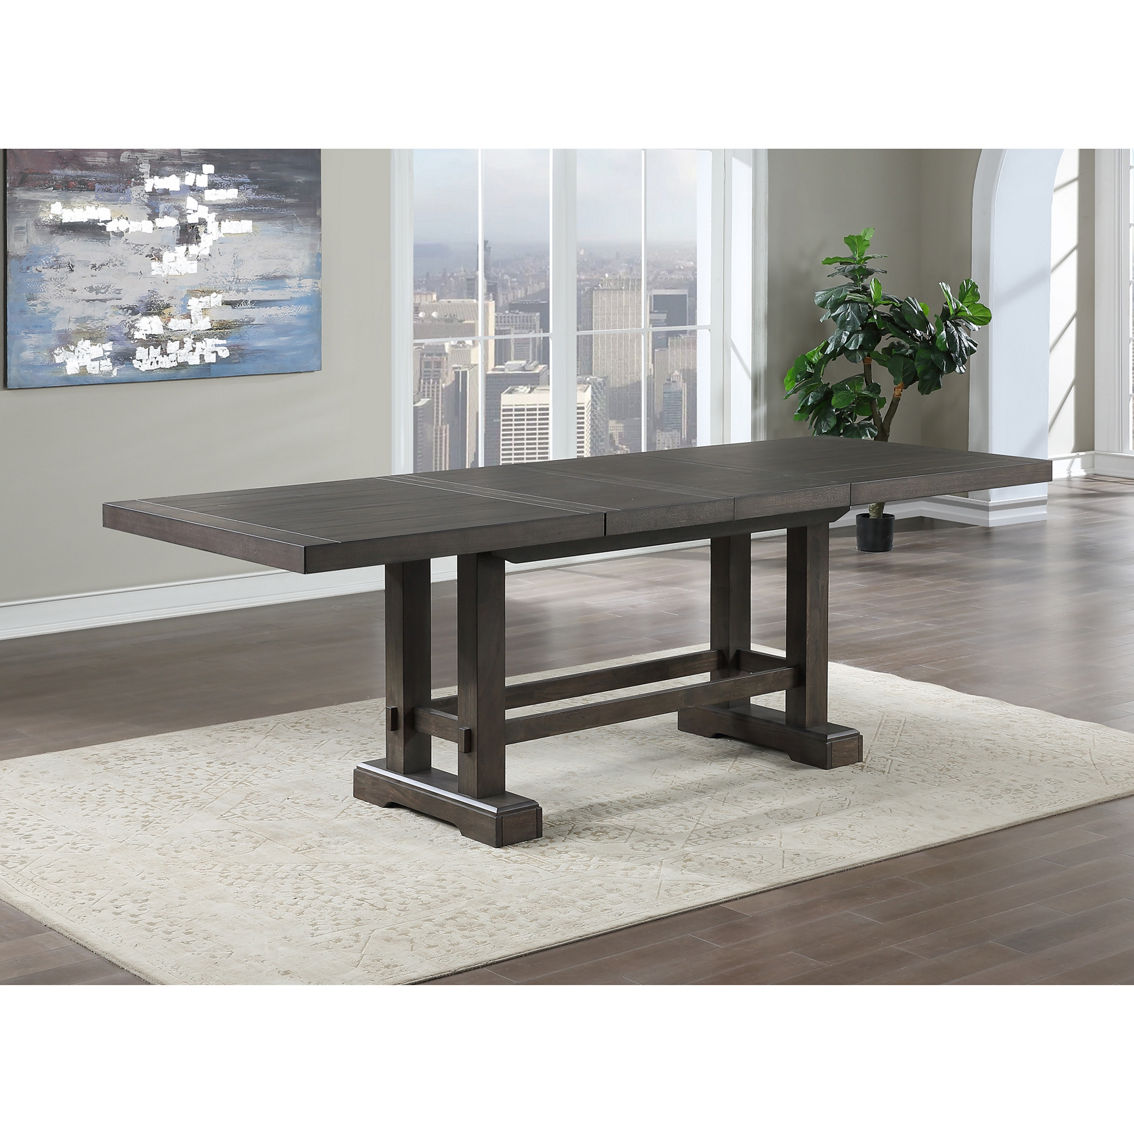 Steve Silver Napa Counter Height Dining 9 pc. Set - Image 2 of 4